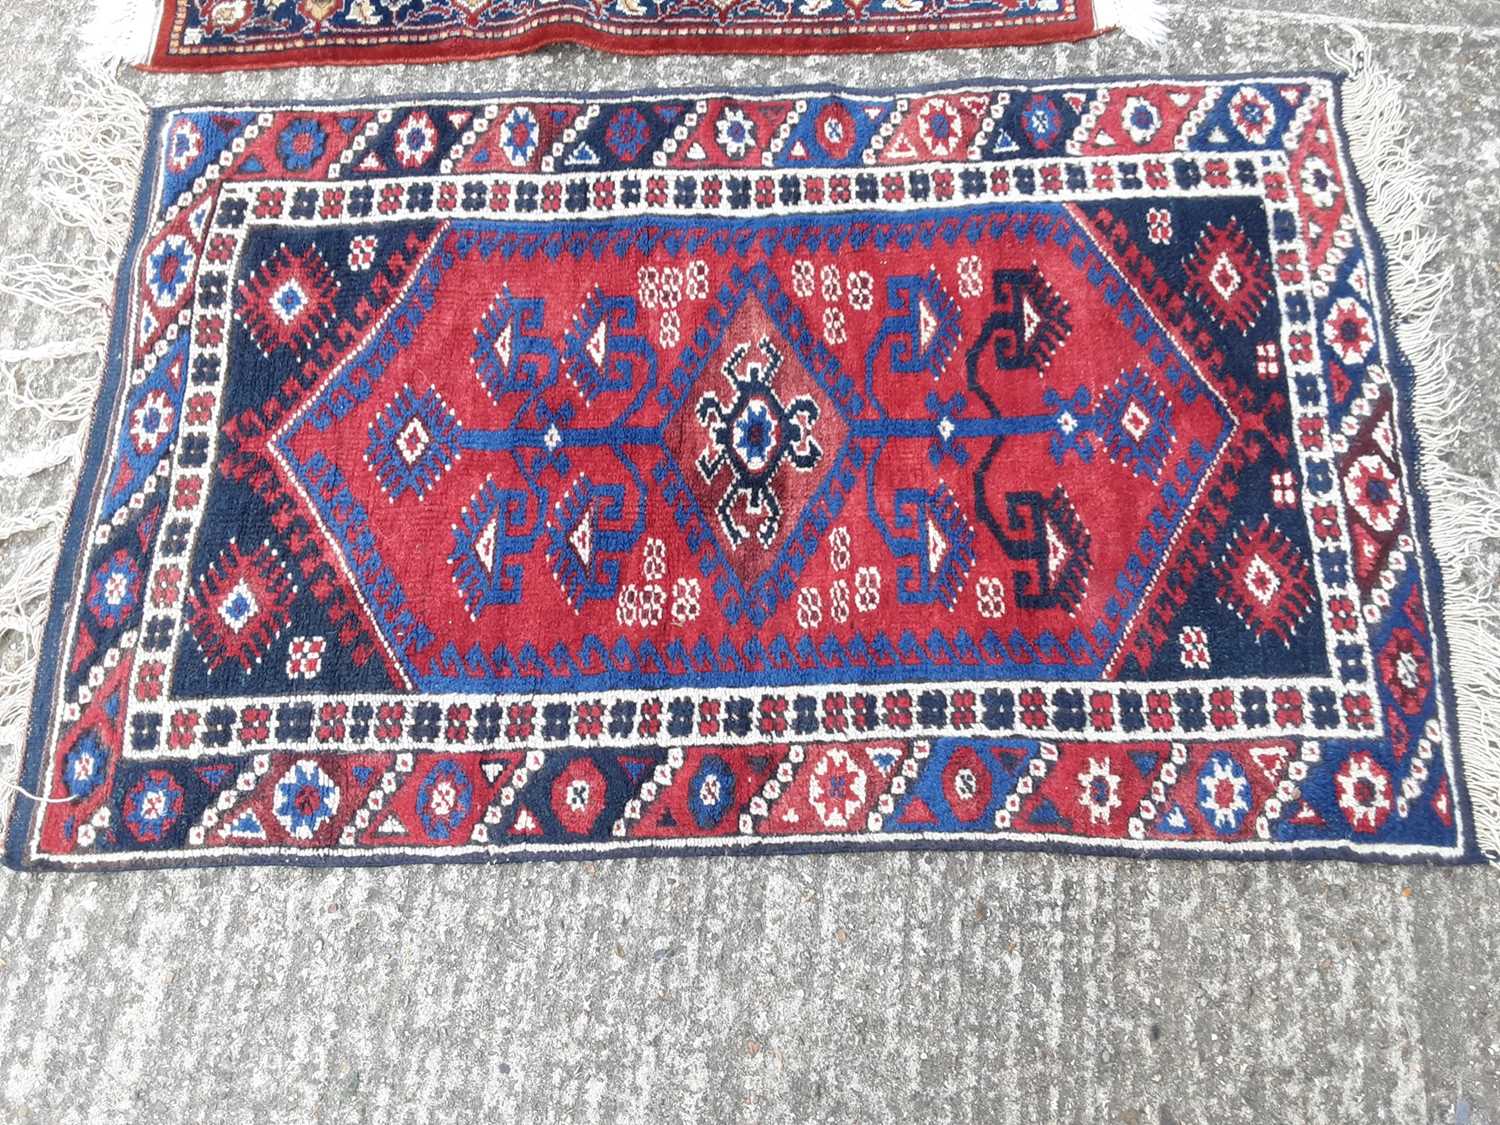 Lot 397 - Two Eastern rugs with geometric decoration on red and blue ground, 113cm x 72cm and 97cm x 62cm